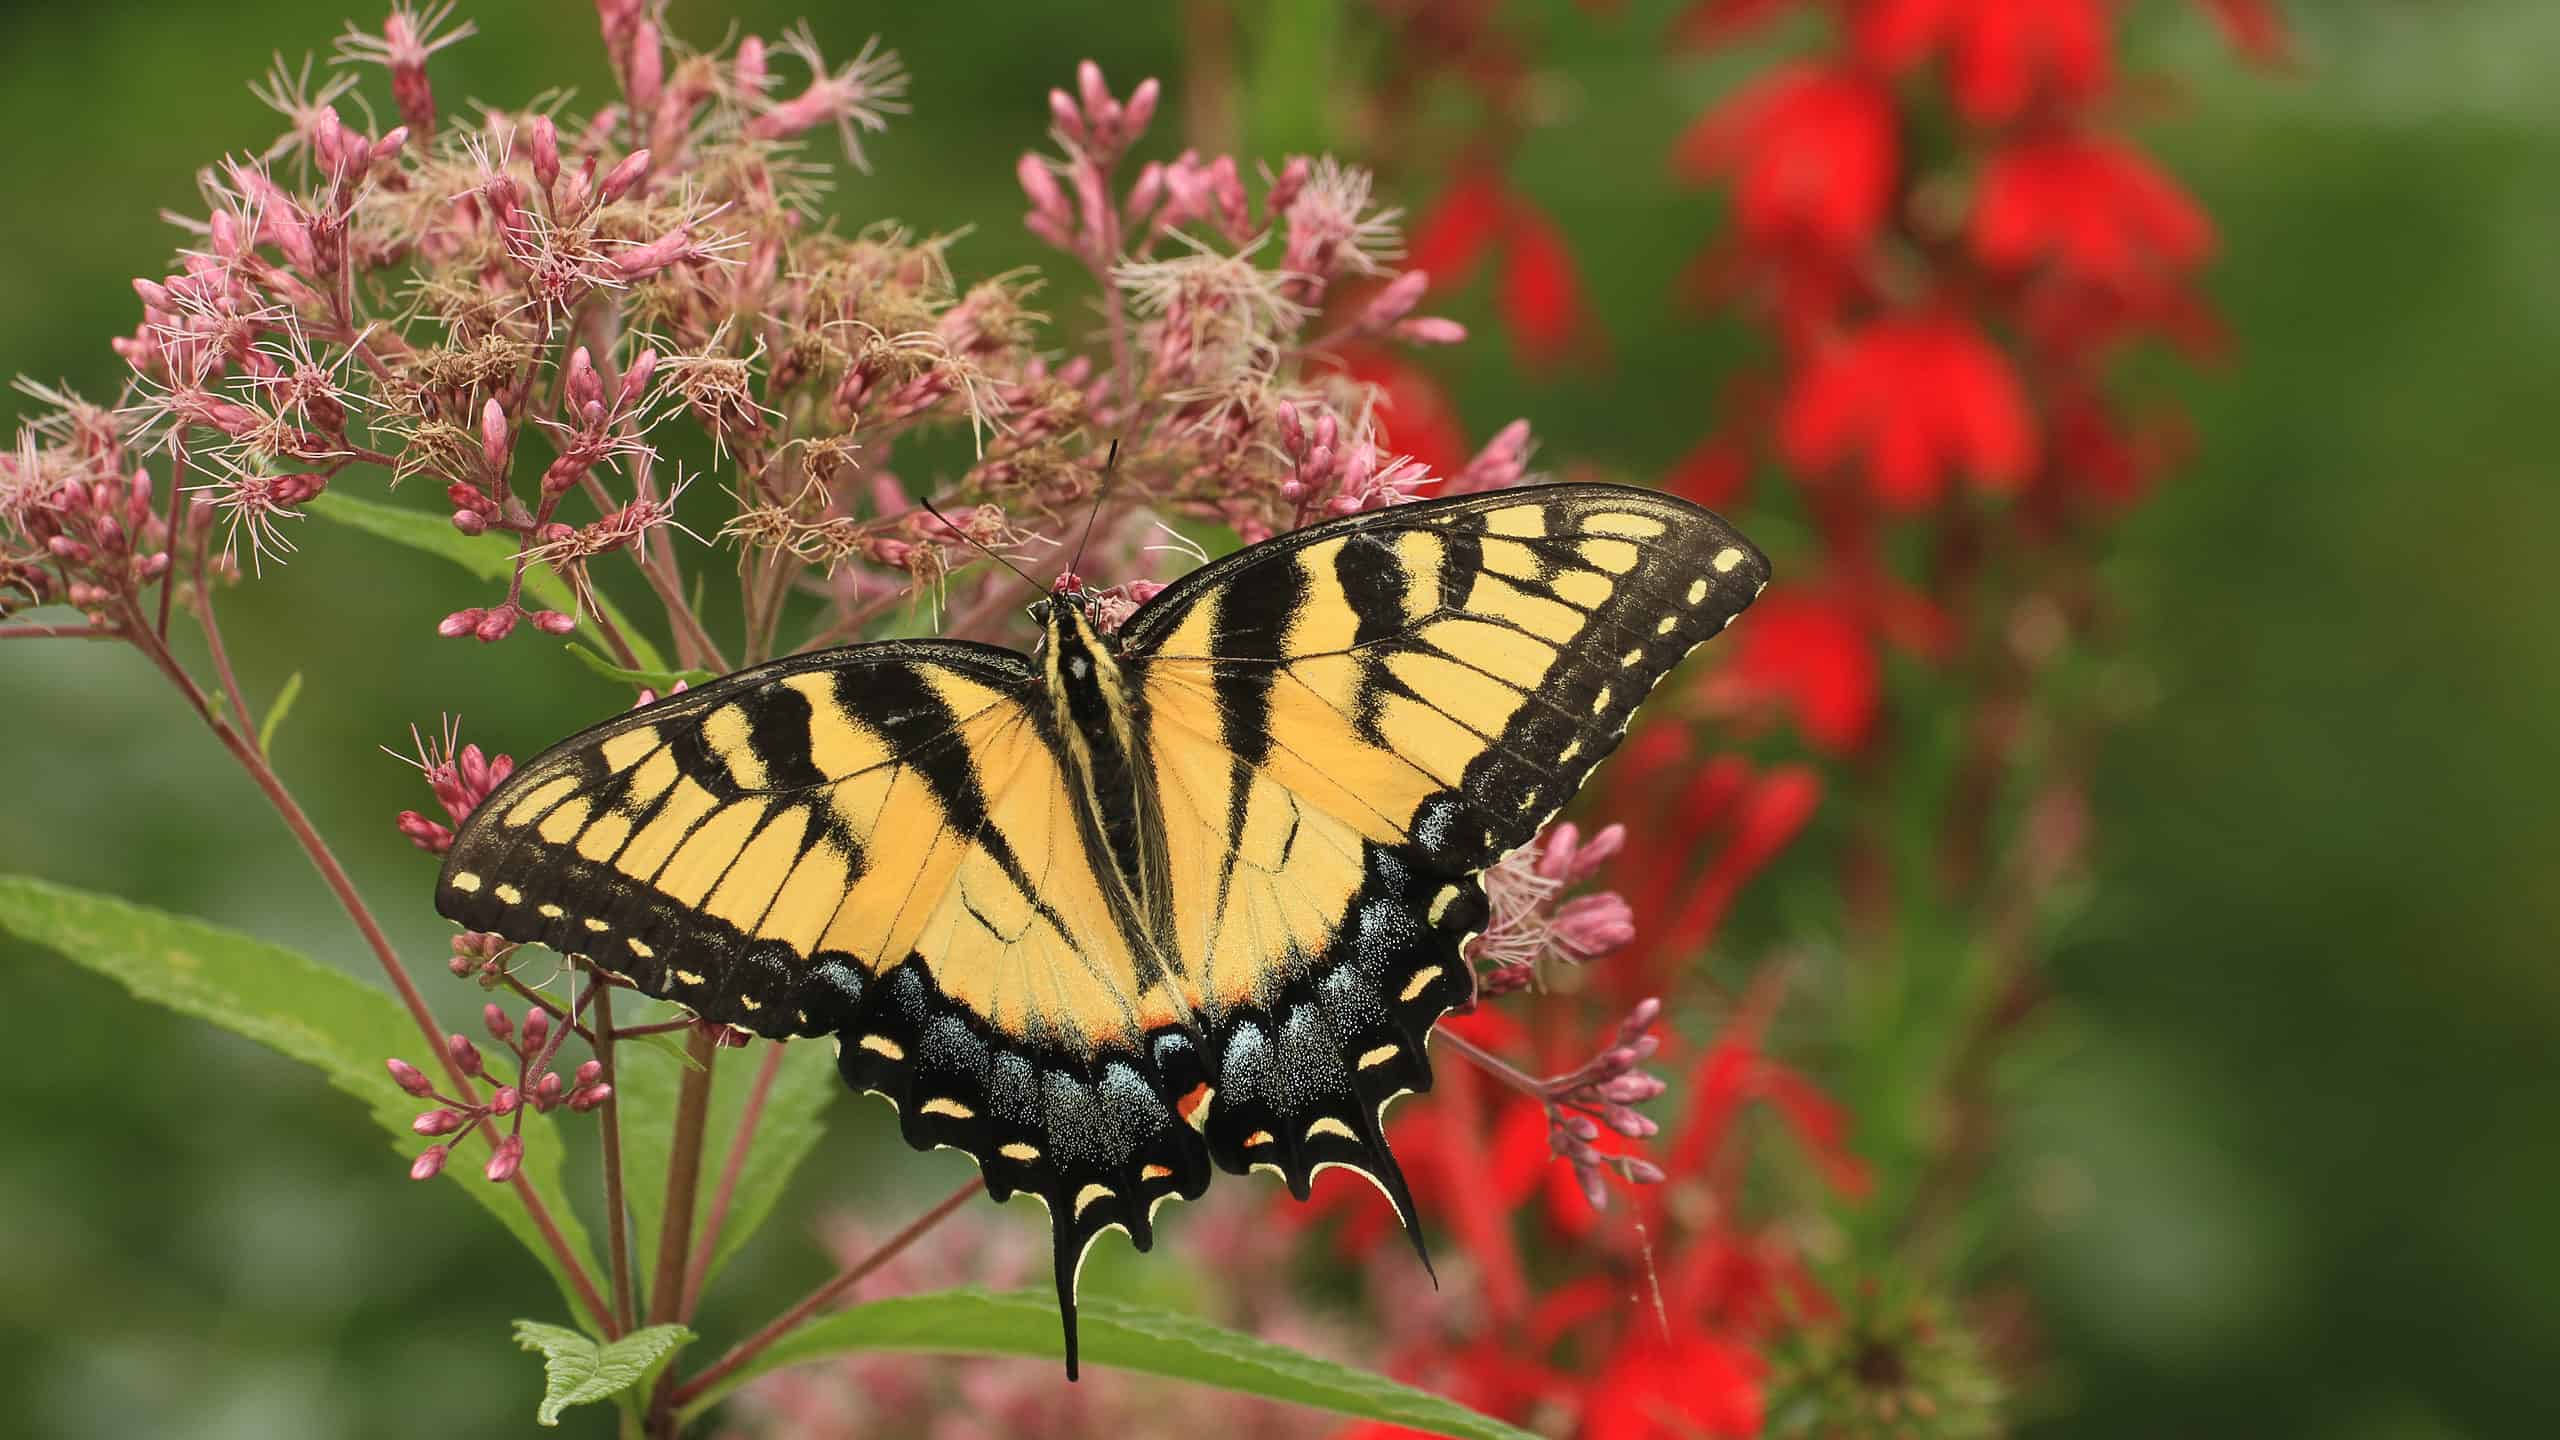 an Eastern tiger swallowtail butterfly feeding from Joe Pye weed, with cardinal flower in the background.